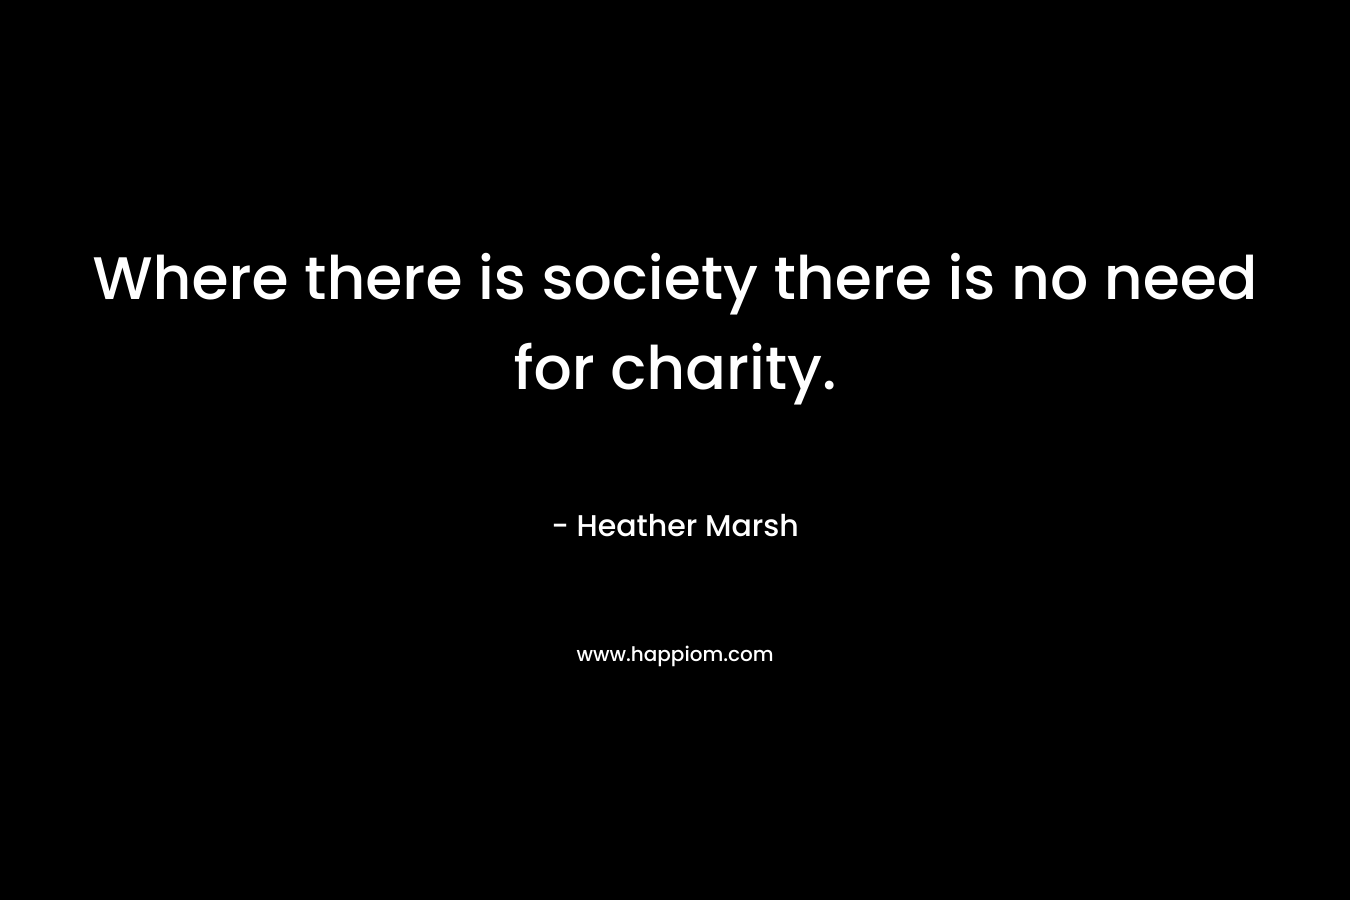 Where there is society there is no need for charity. – Heather Marsh